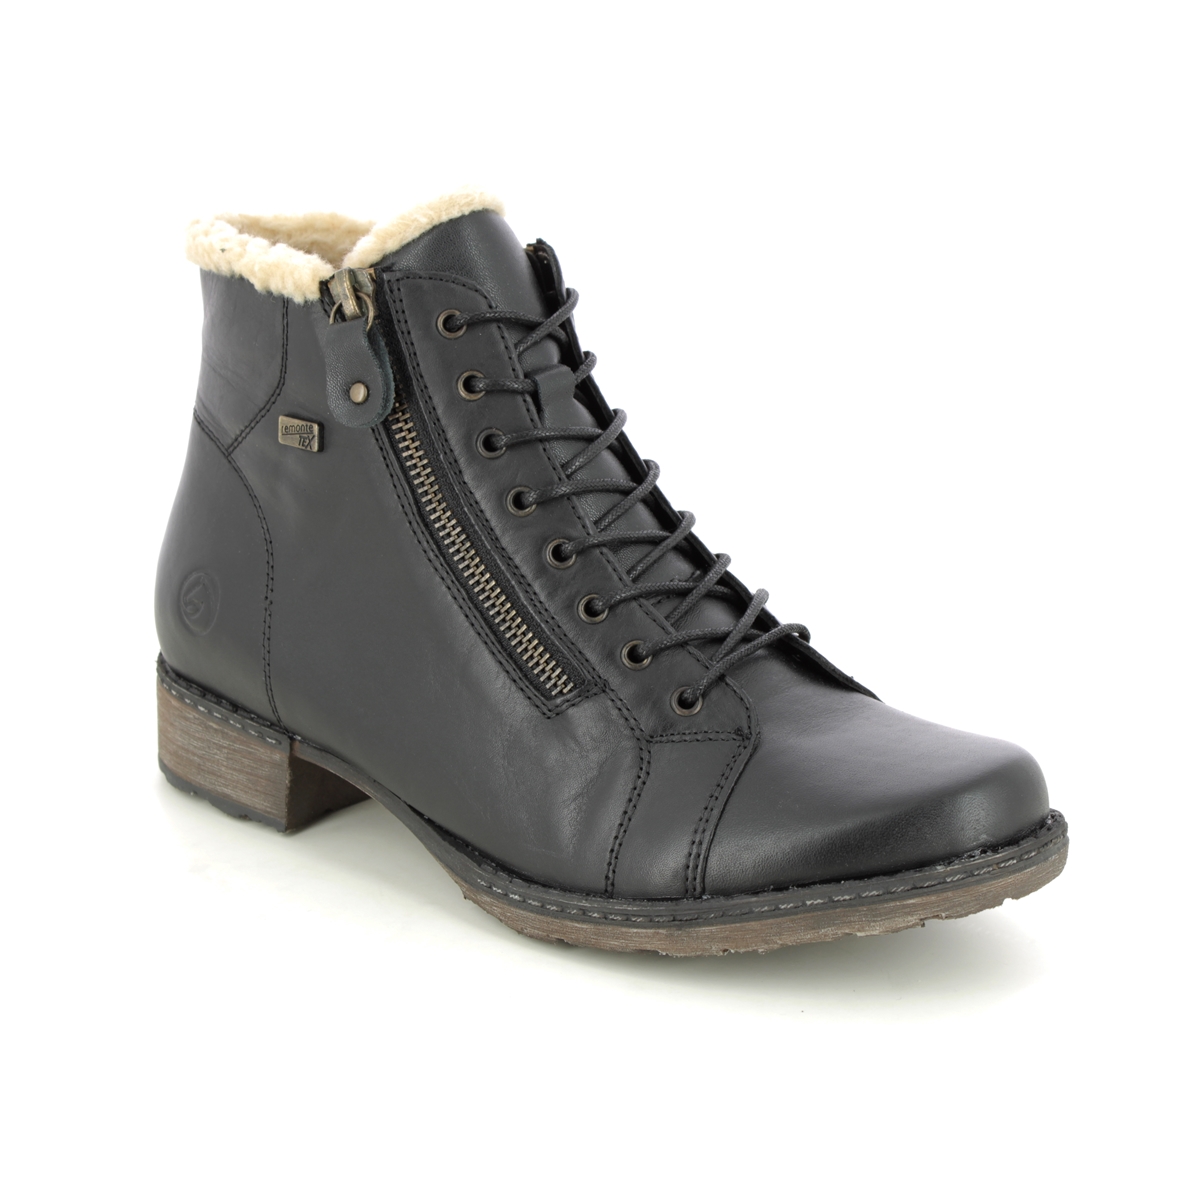 Remonte D4372-01 Peesienna Tex Black leather Womens Lace Up Boots in a Plain Leather in Size 37